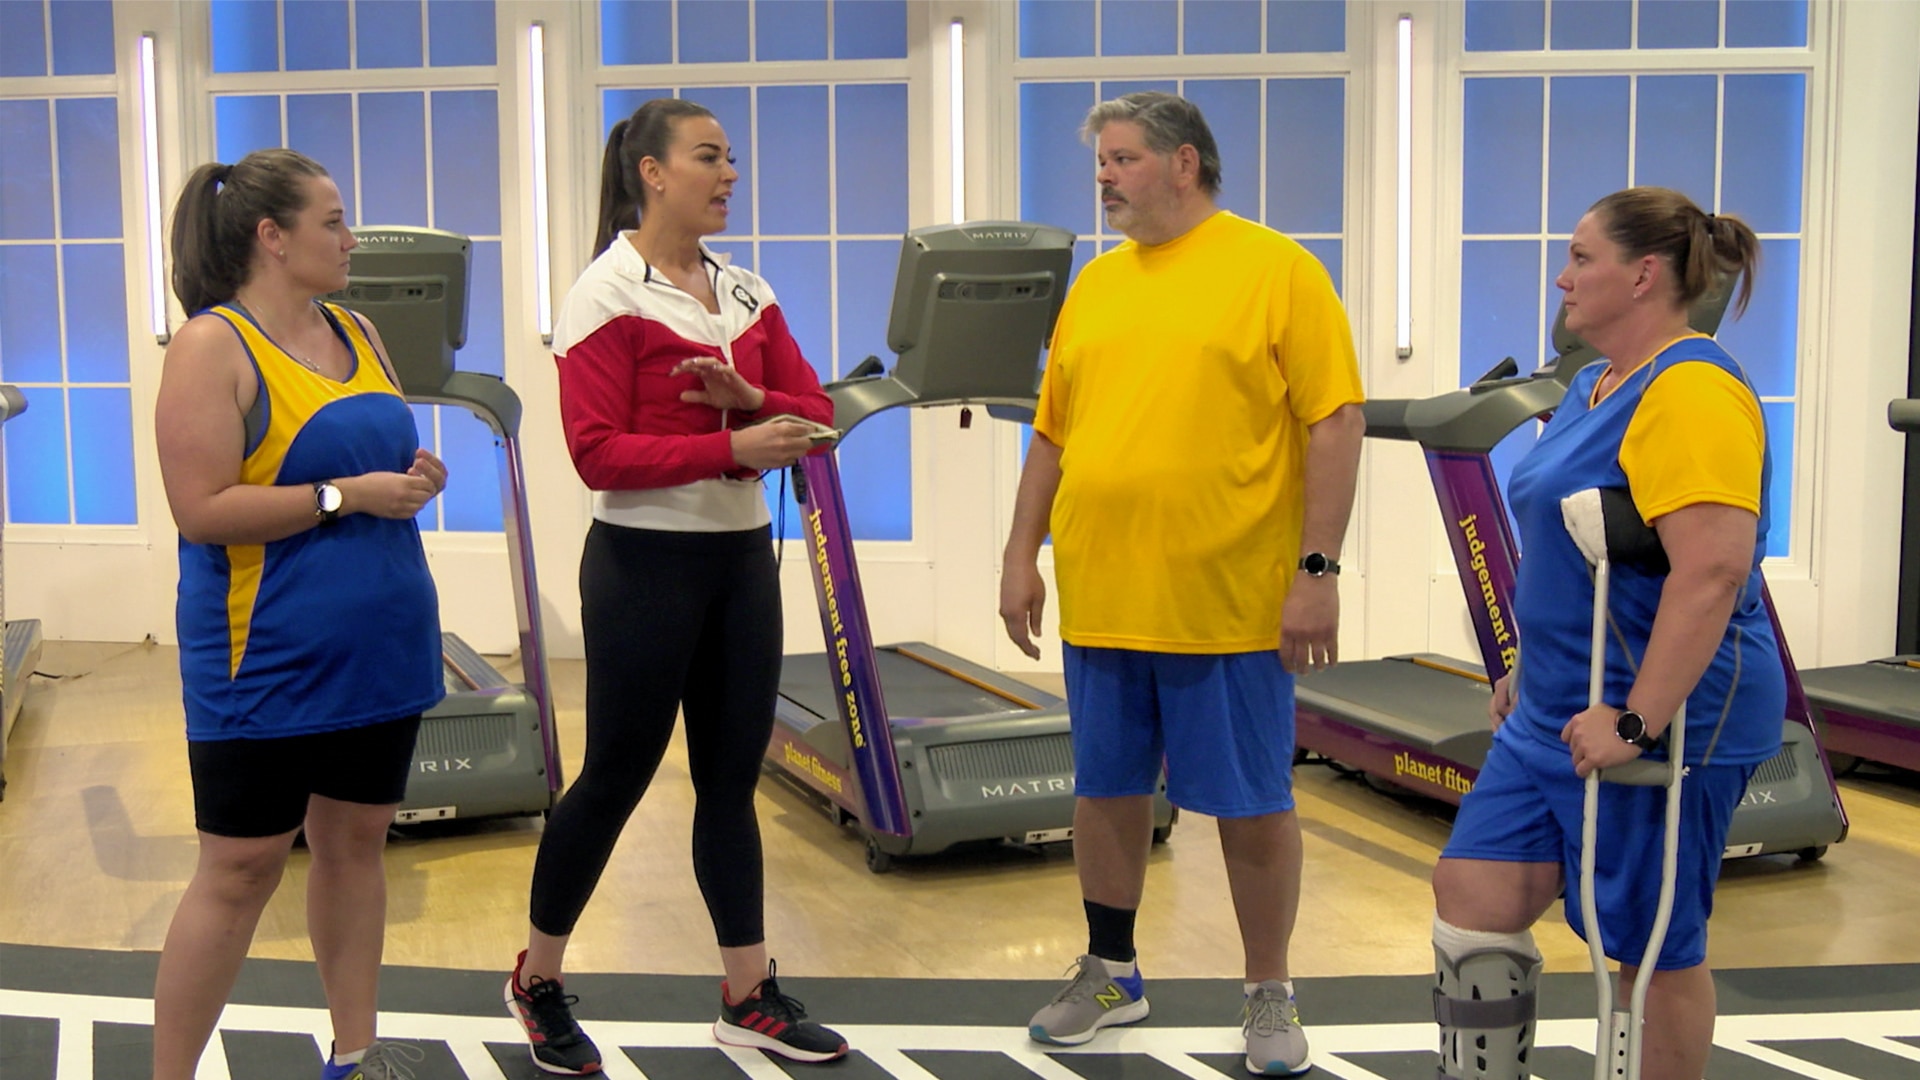 Where To Watch Biggest Loser Uk Watch The Biggest Loser Episode: Going Solo - USANetwork.com